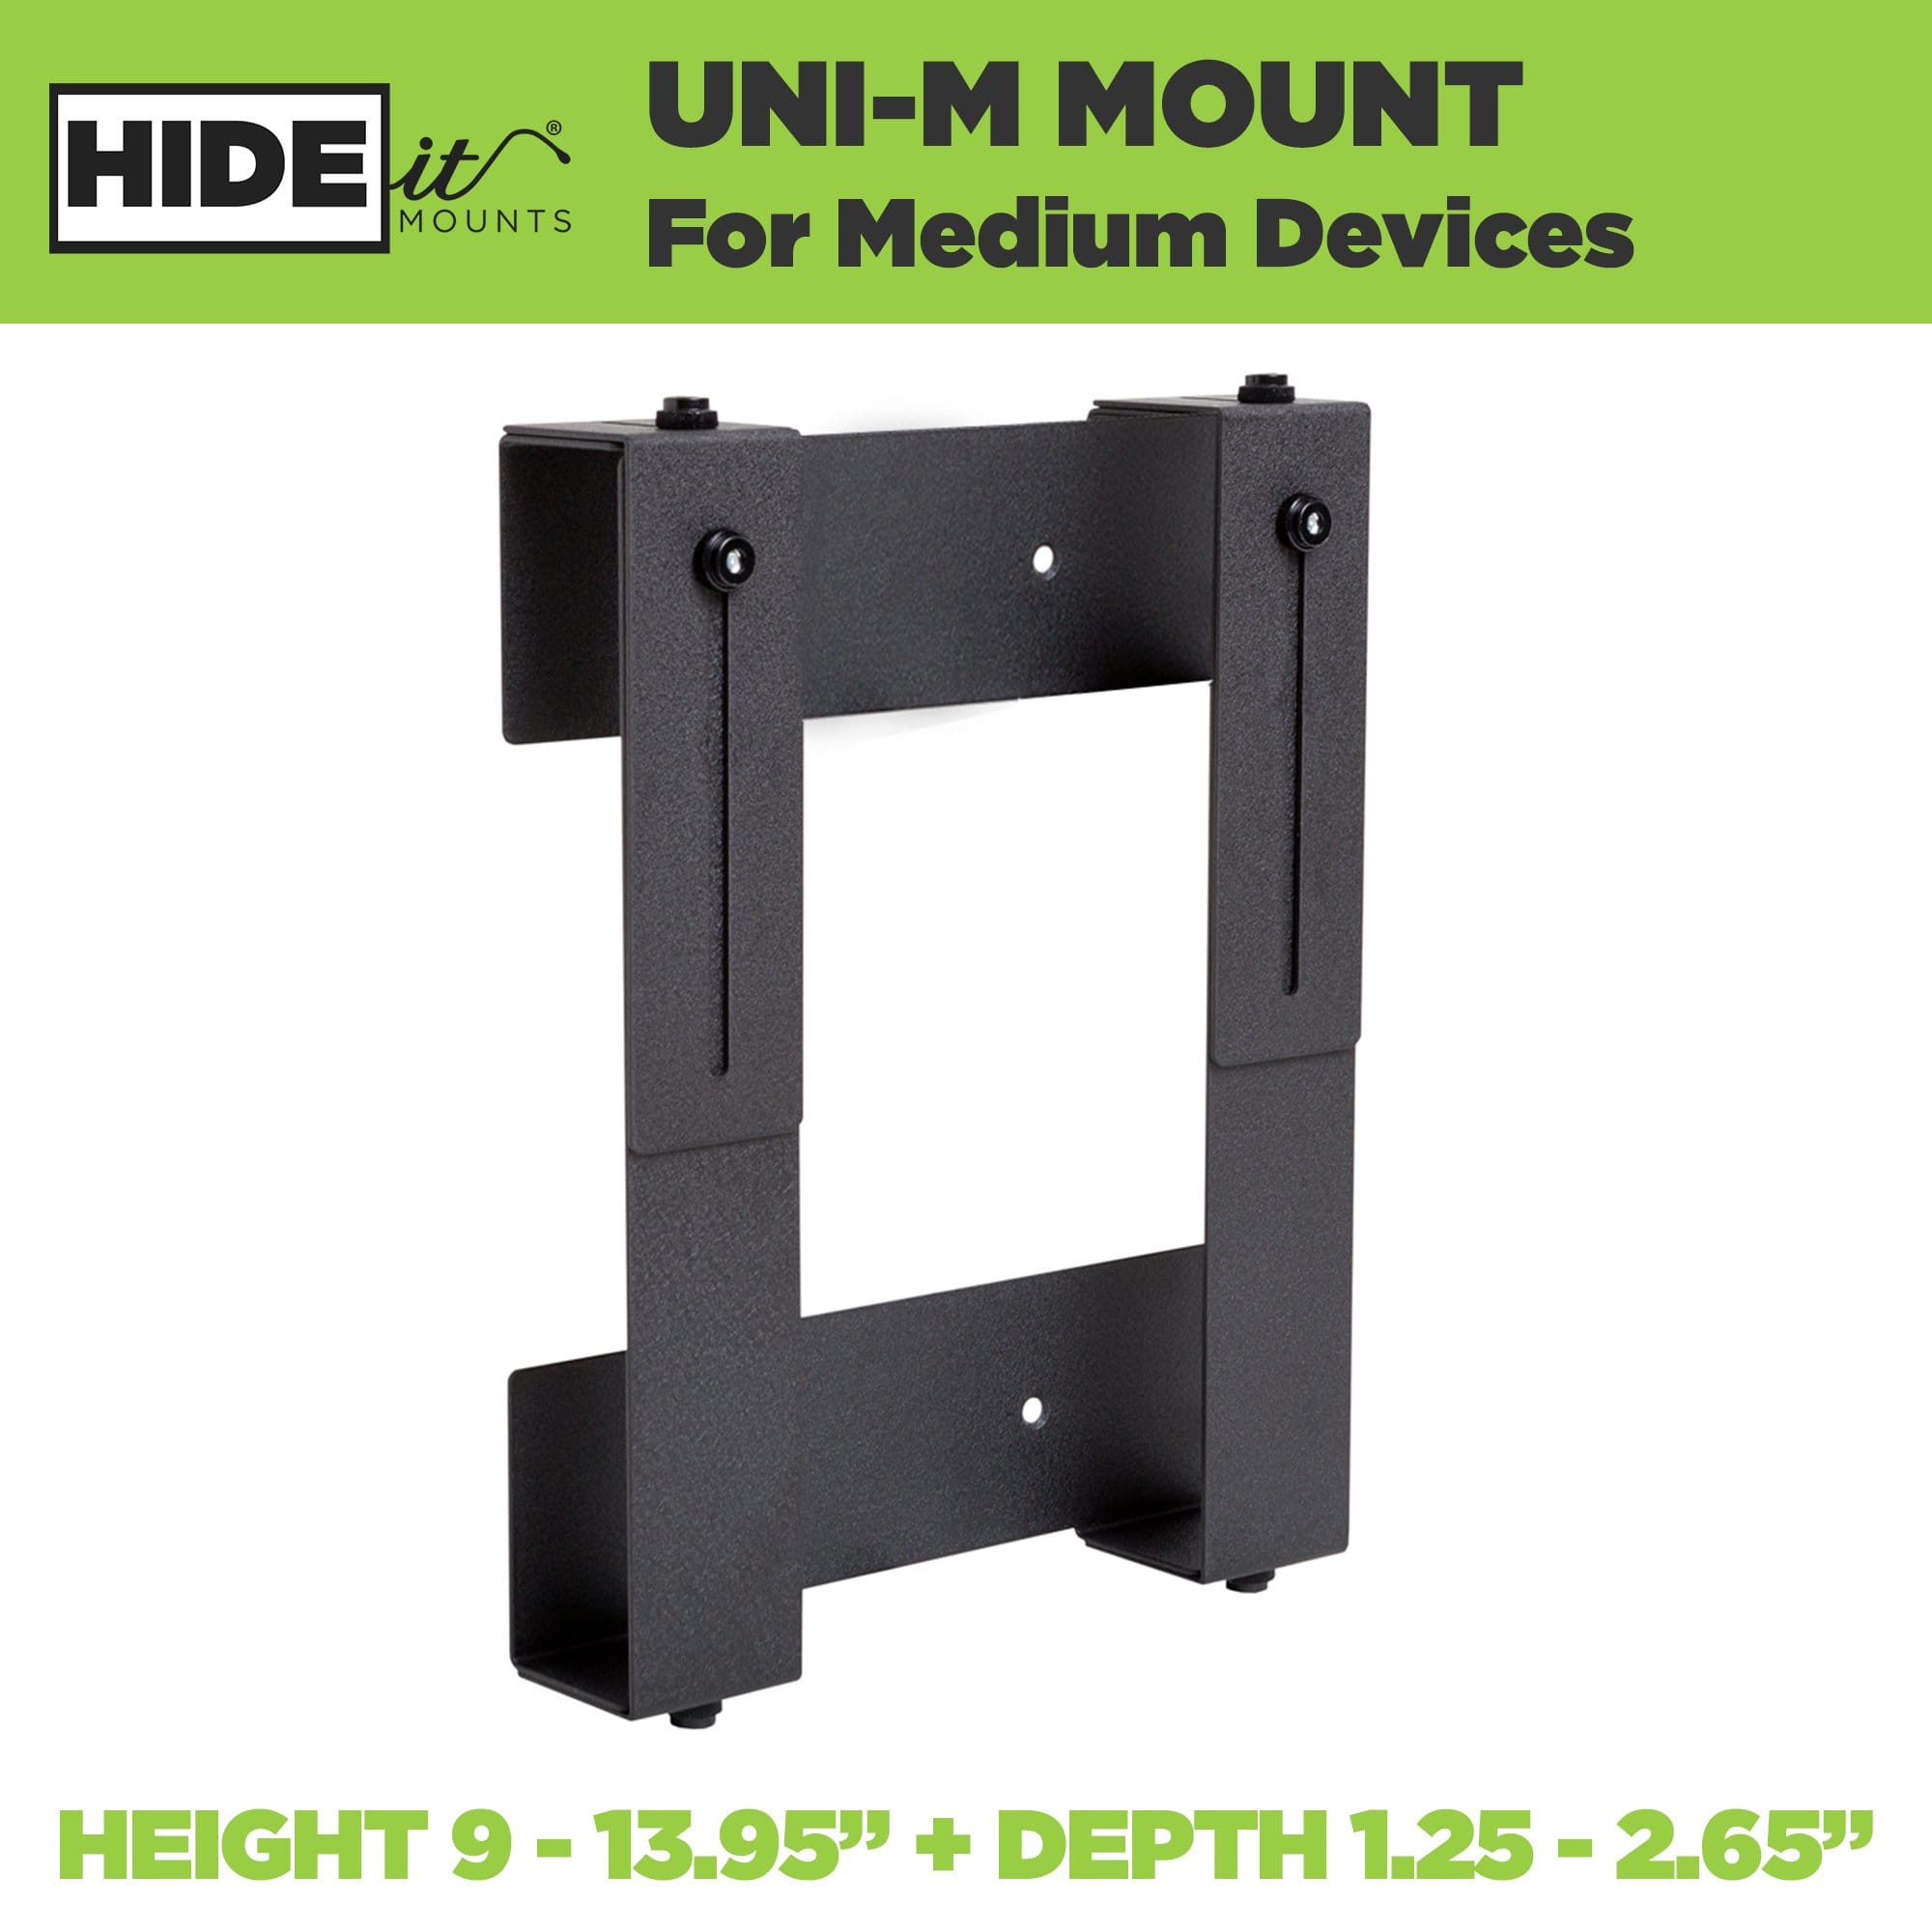 Steel adjustable wall mount for medium-sized electronic devices, made by HIDEit Mounts.